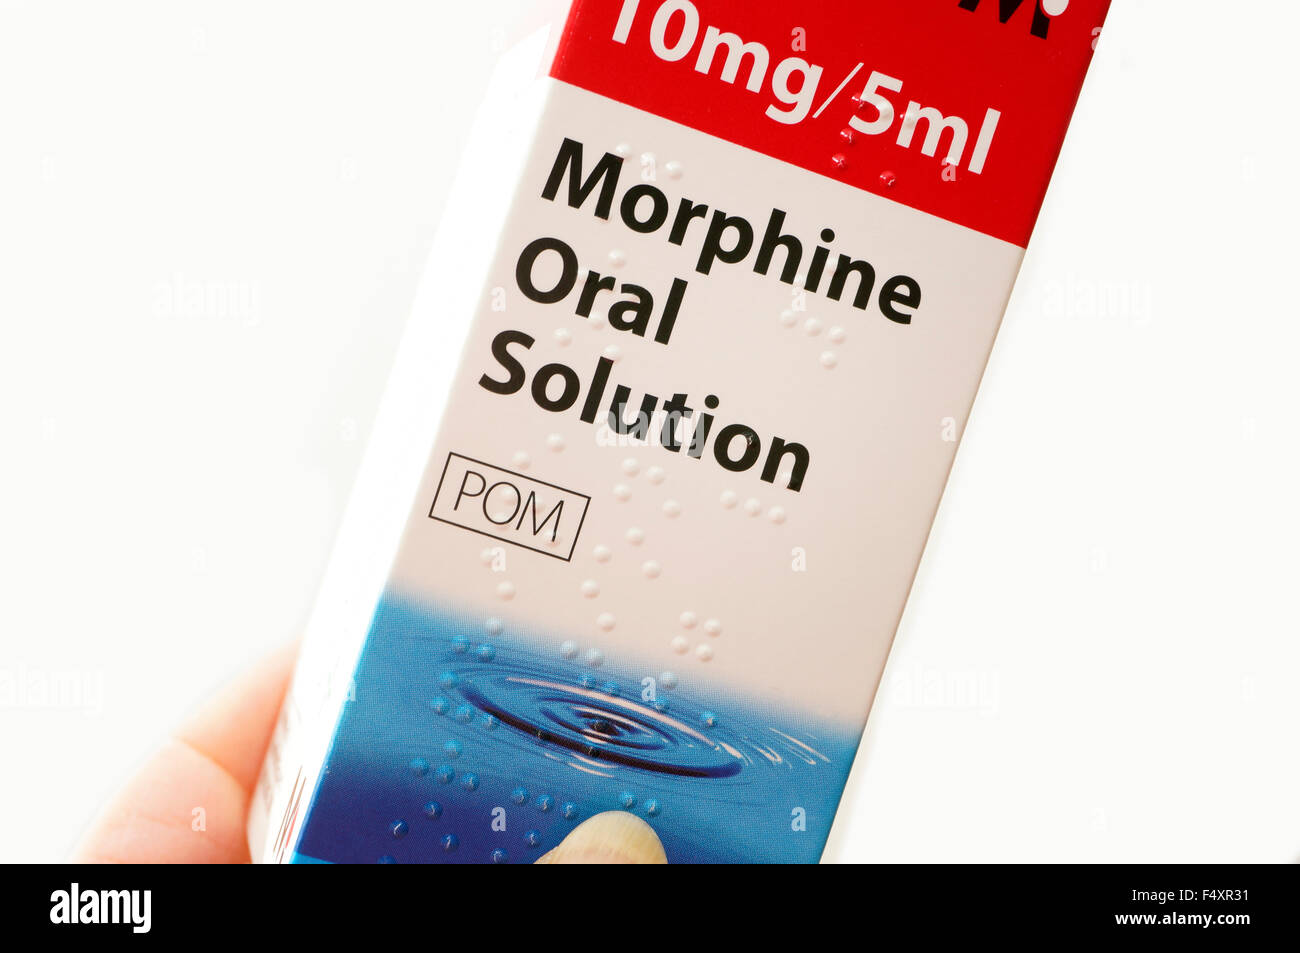 Woman holding a bottle of Morphine oral solution (morphine is an alkaloid with pain relieving properties) used for pain relief Stock Photo